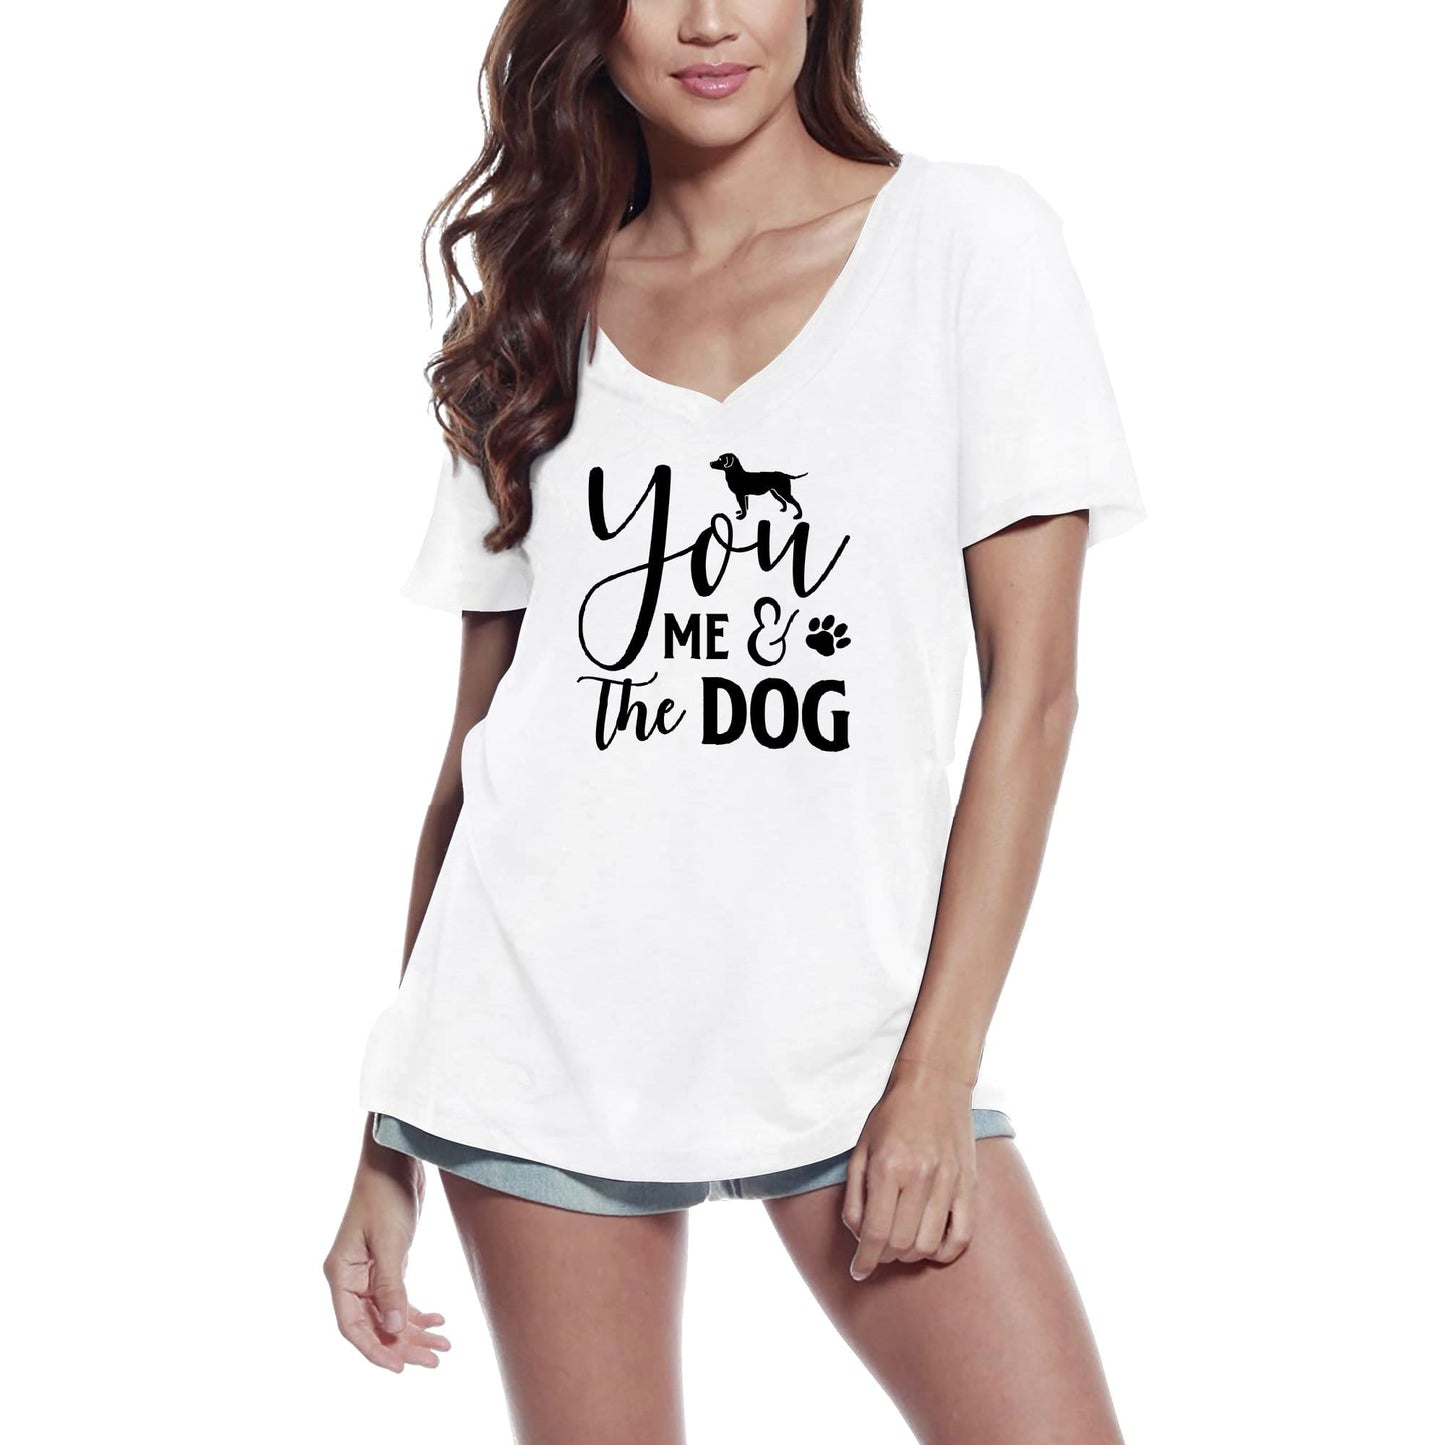 ULTRABASIC Women's T-Shirt You Me and the Dog - Funny Paw Tee Shirt Tops